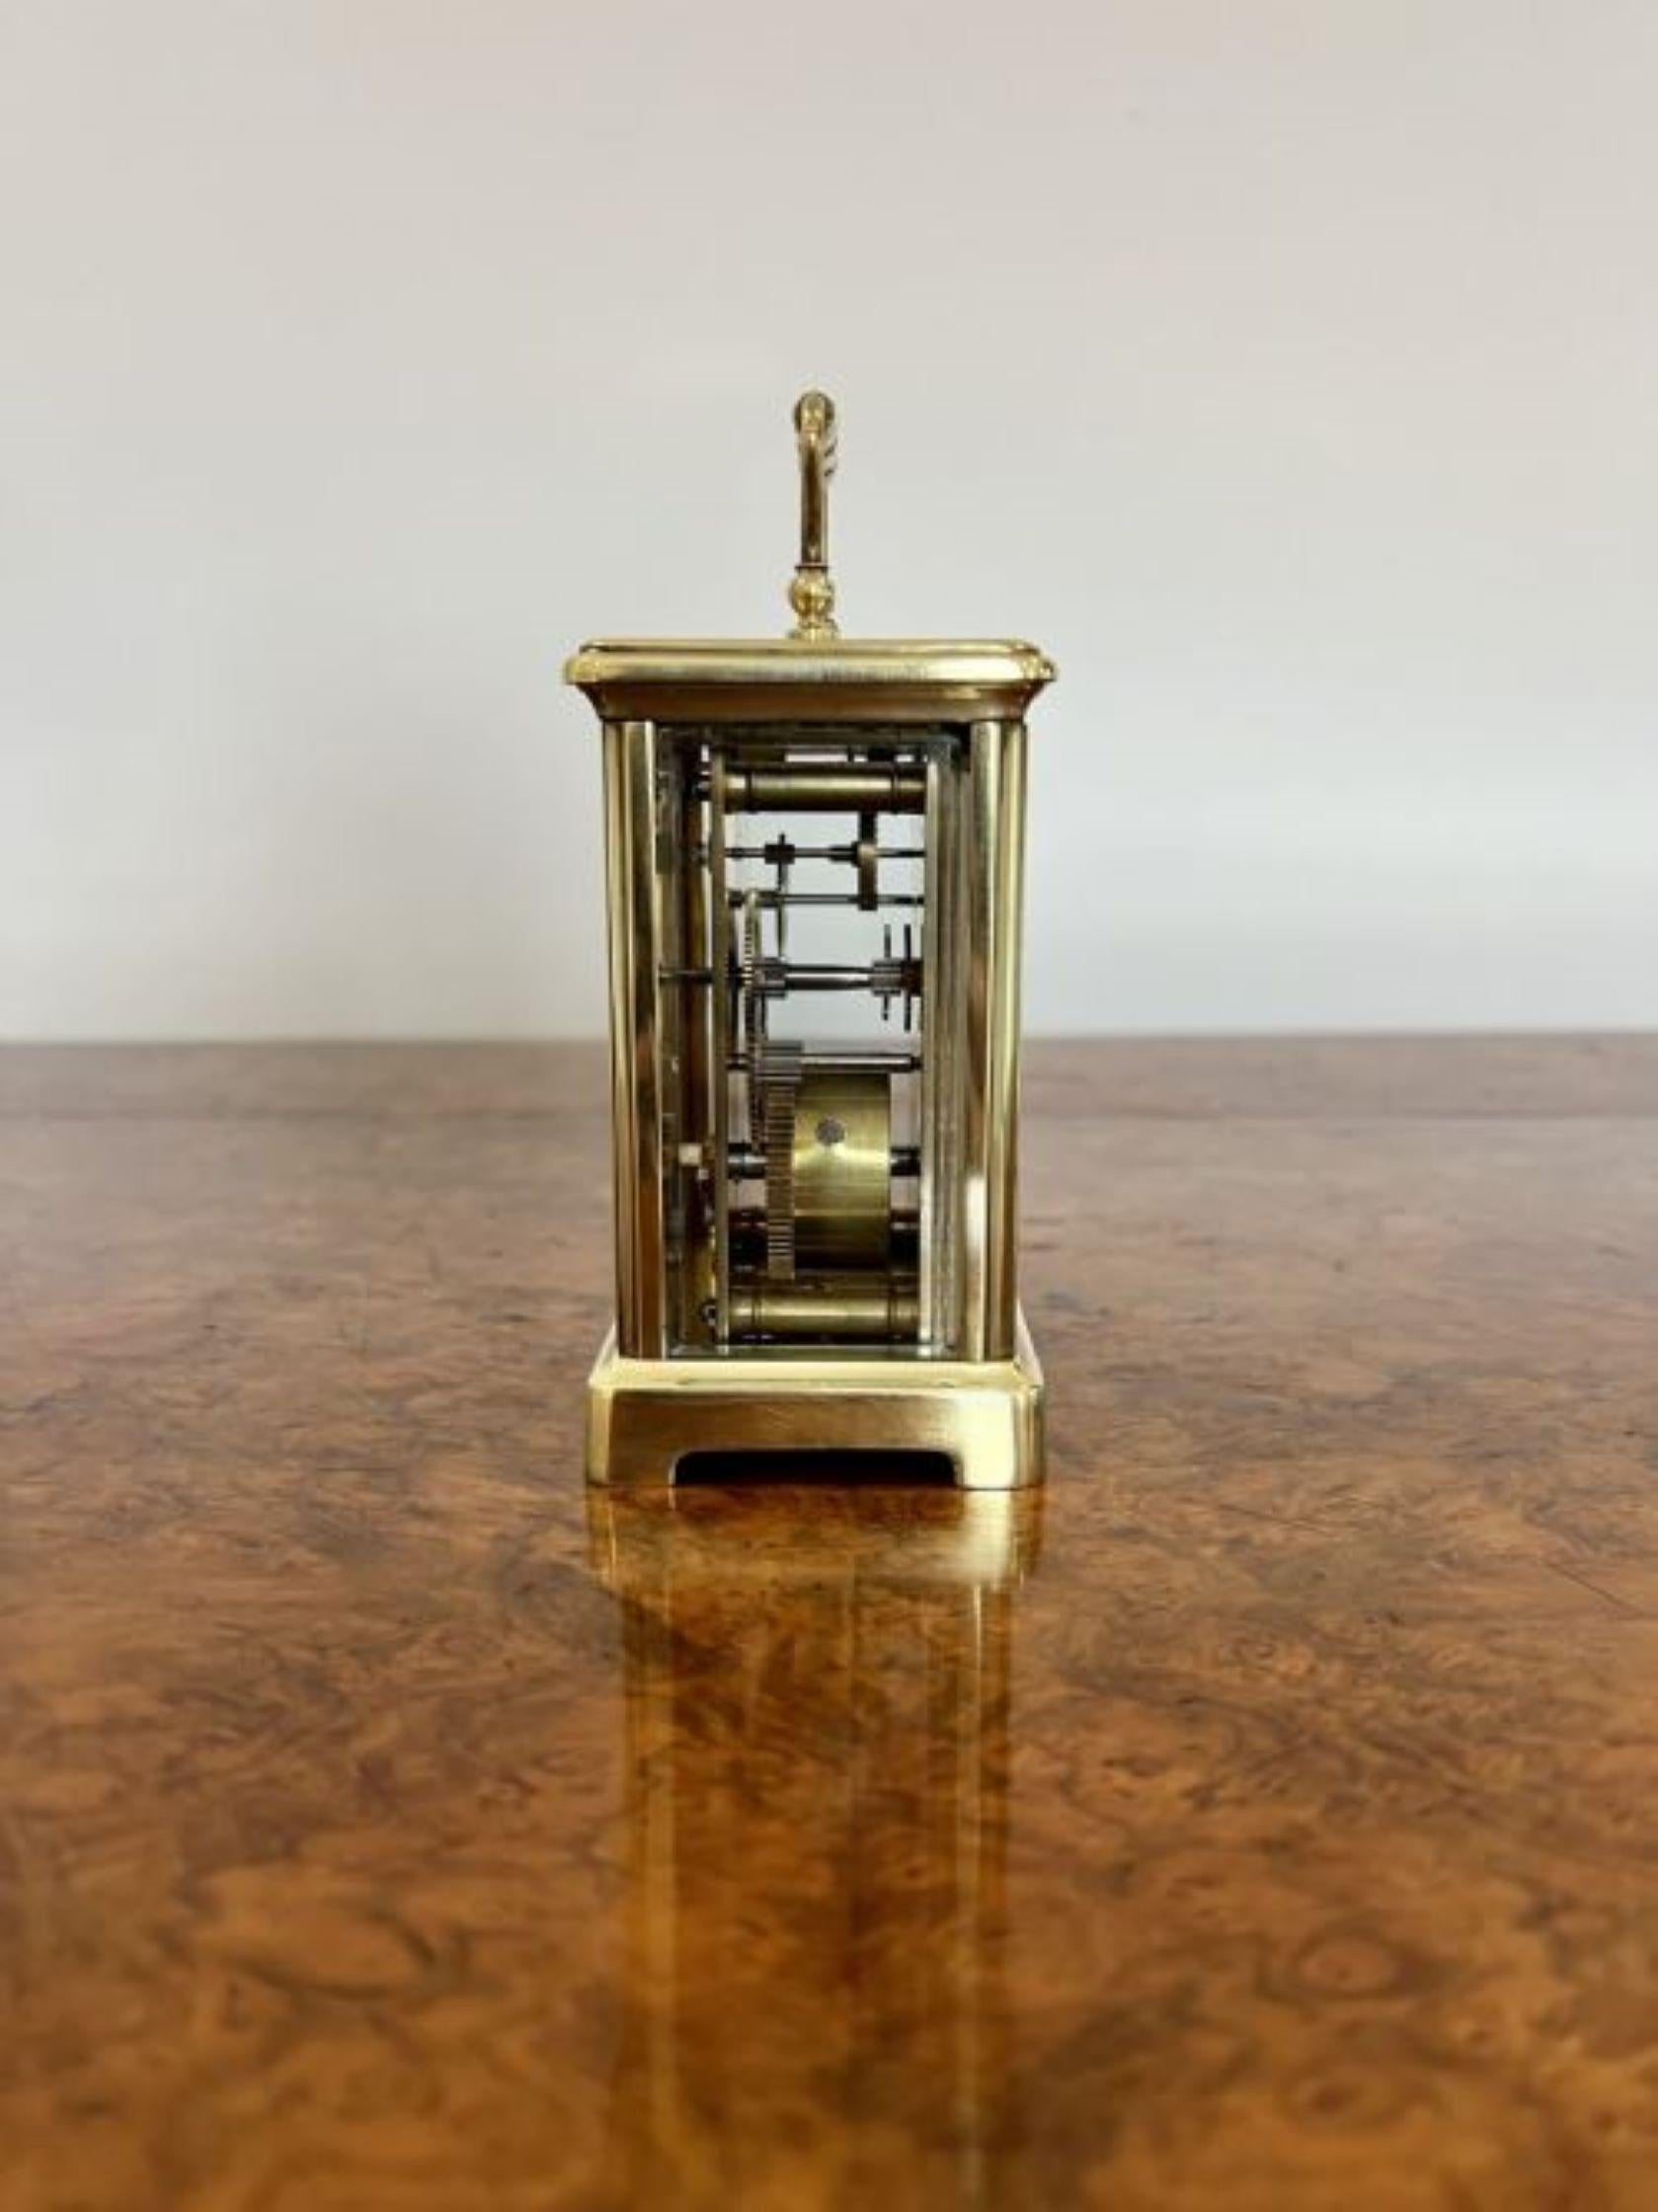 Quality antique Victorian French brass carriage clock having a quality brass case with bevelled glass, white enamel dial with original hands and key, eight day French movement and a handle to the top of the case. 
Please note all of our clocks are